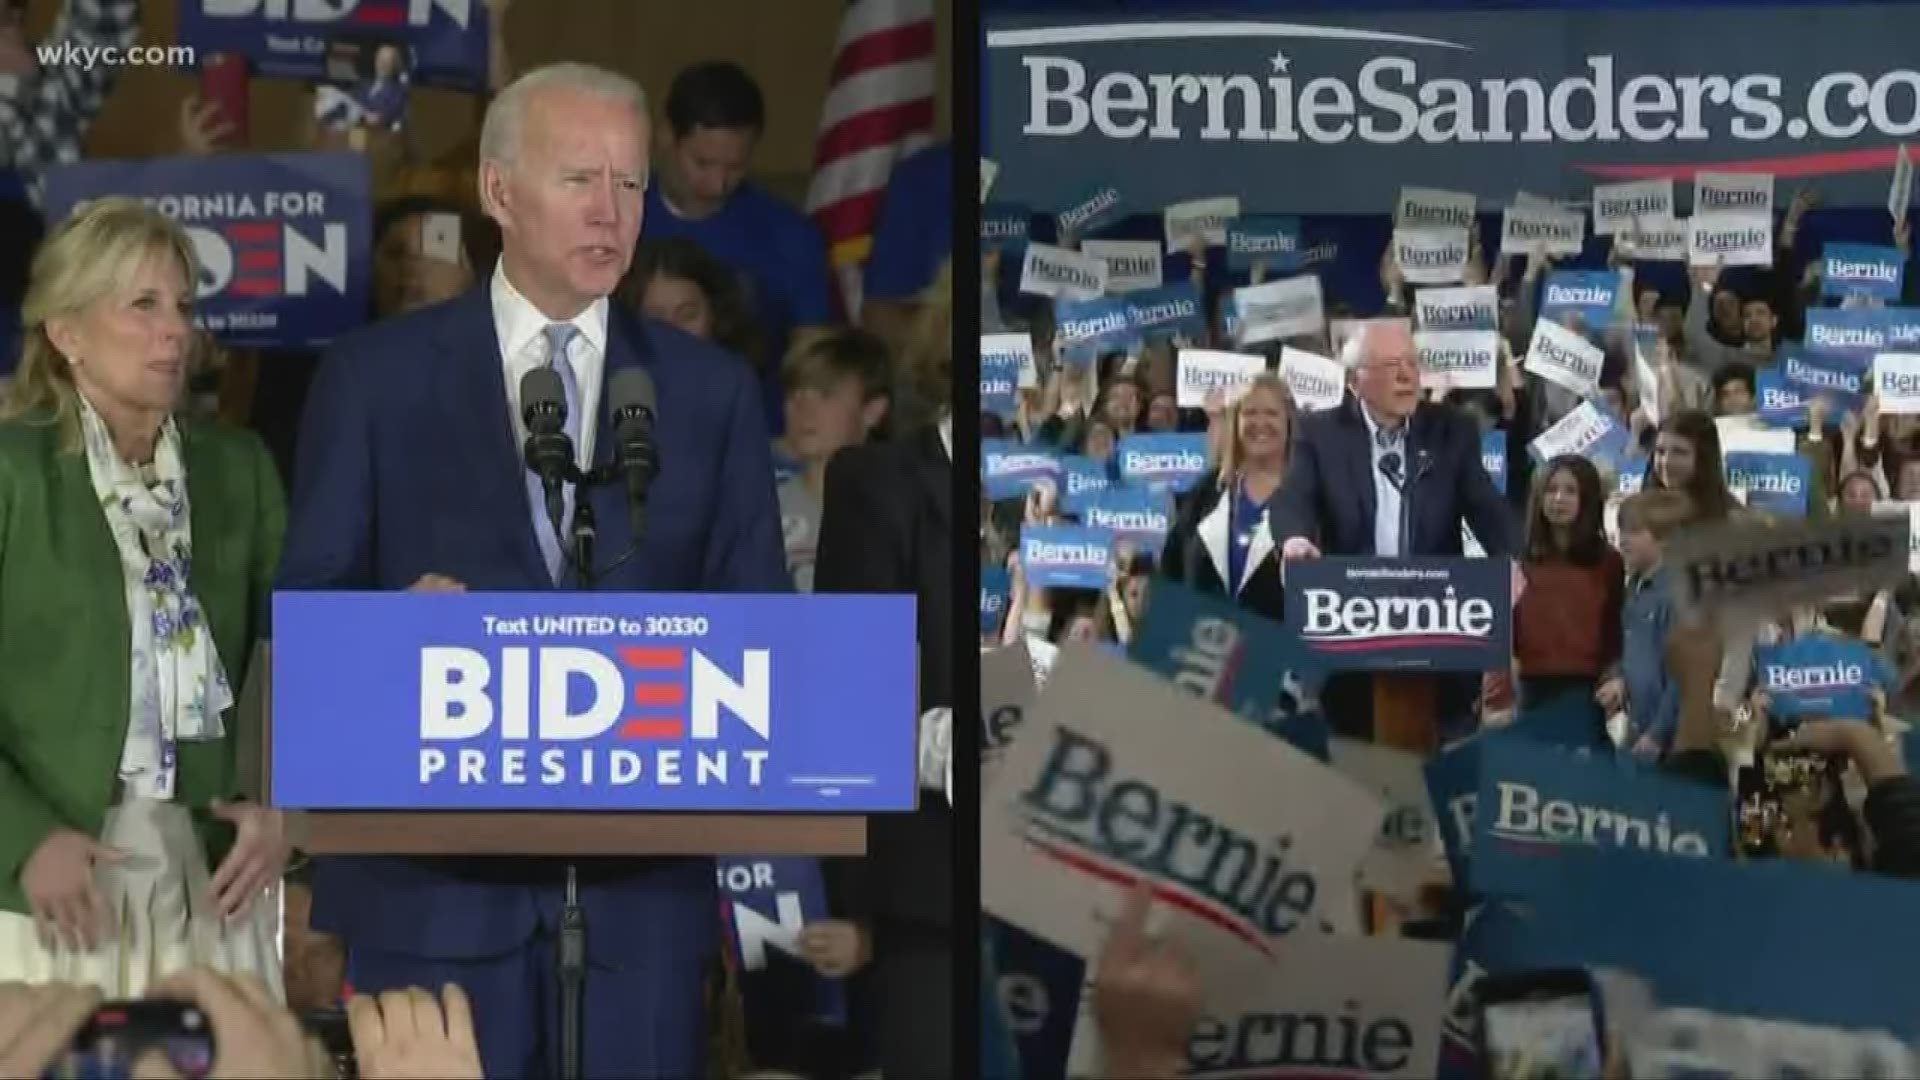 March 10, 2020: Cleveland will be the focus of the political world today as both Joe Biden and Bernie Sanders hold campaign rallies in town. Here's a sneak peek.